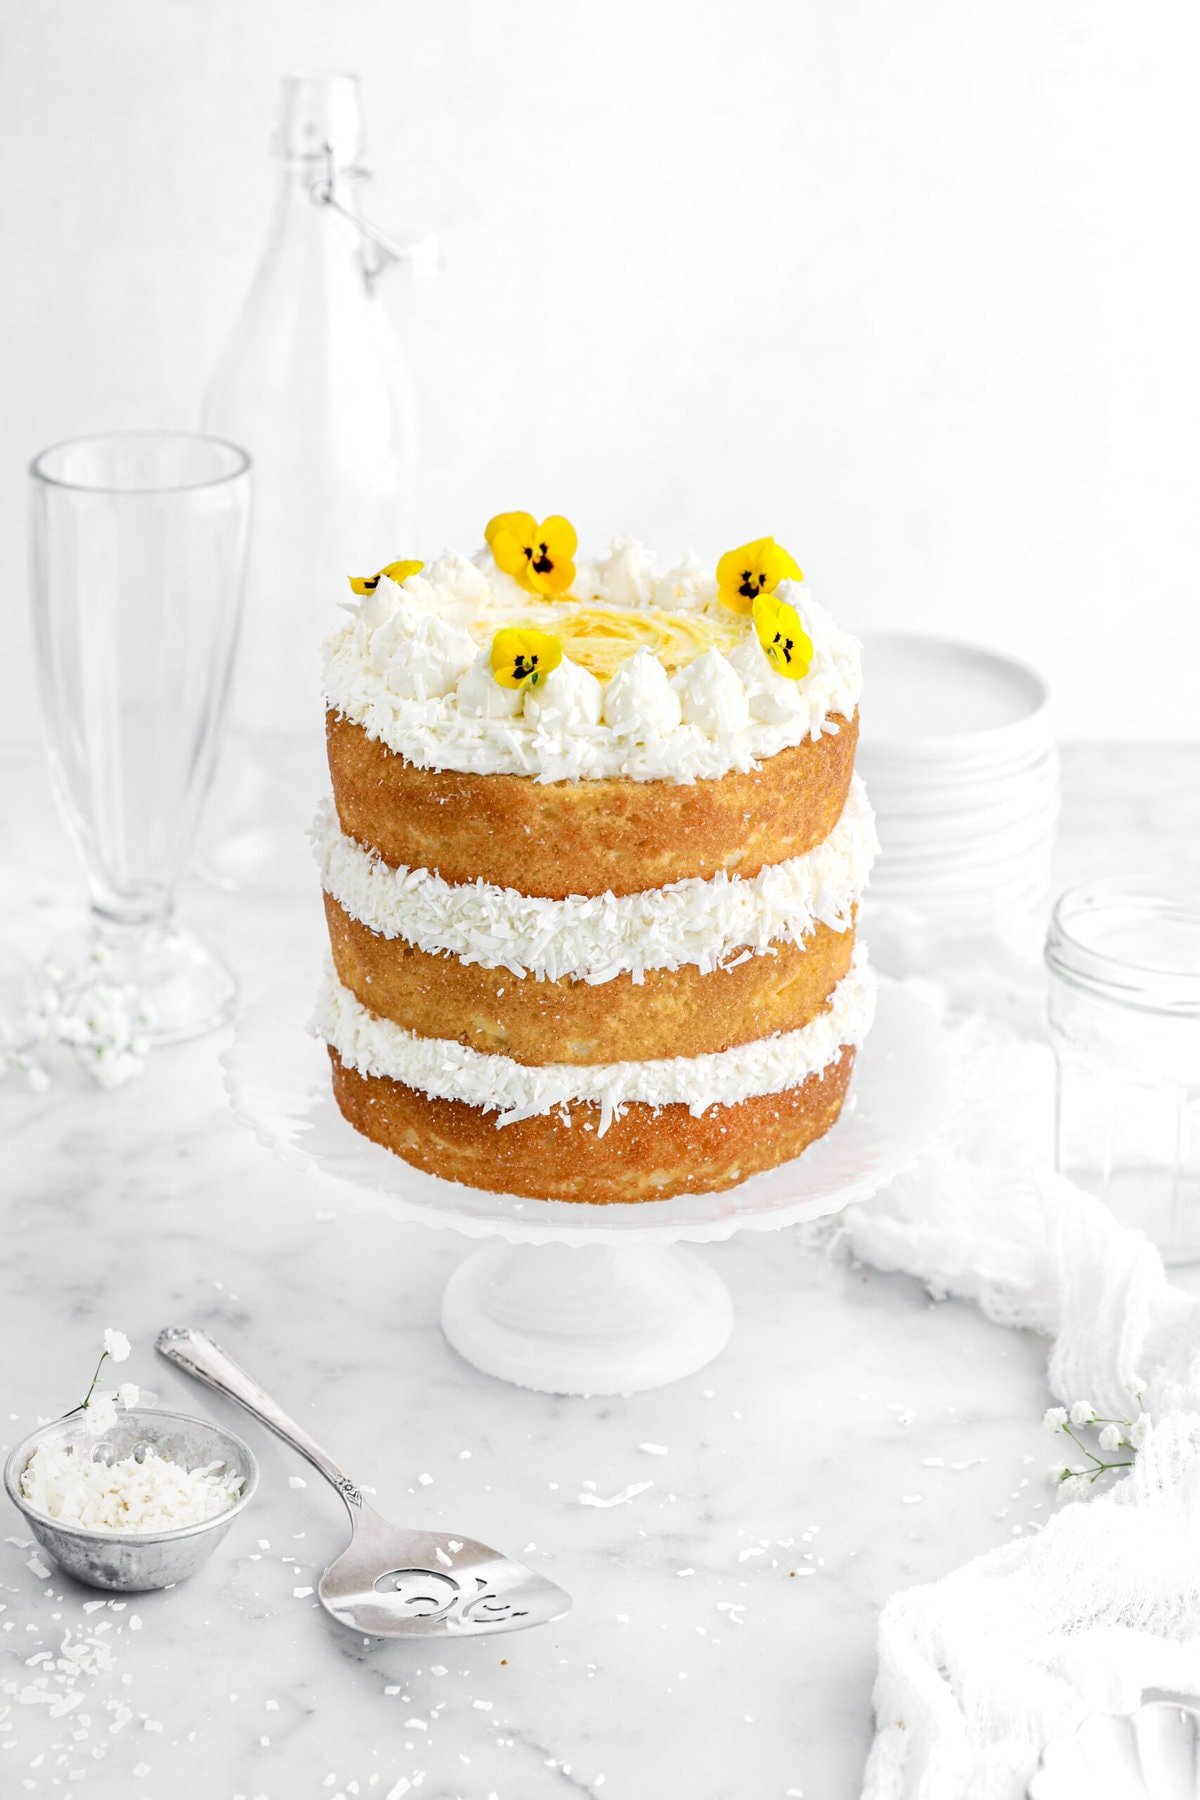 three layers of naked lemon coconut cake with yellow flower son top on a white cake plate, a cake knife, bowl of shredded coconut, and white flowers around on marble surface.